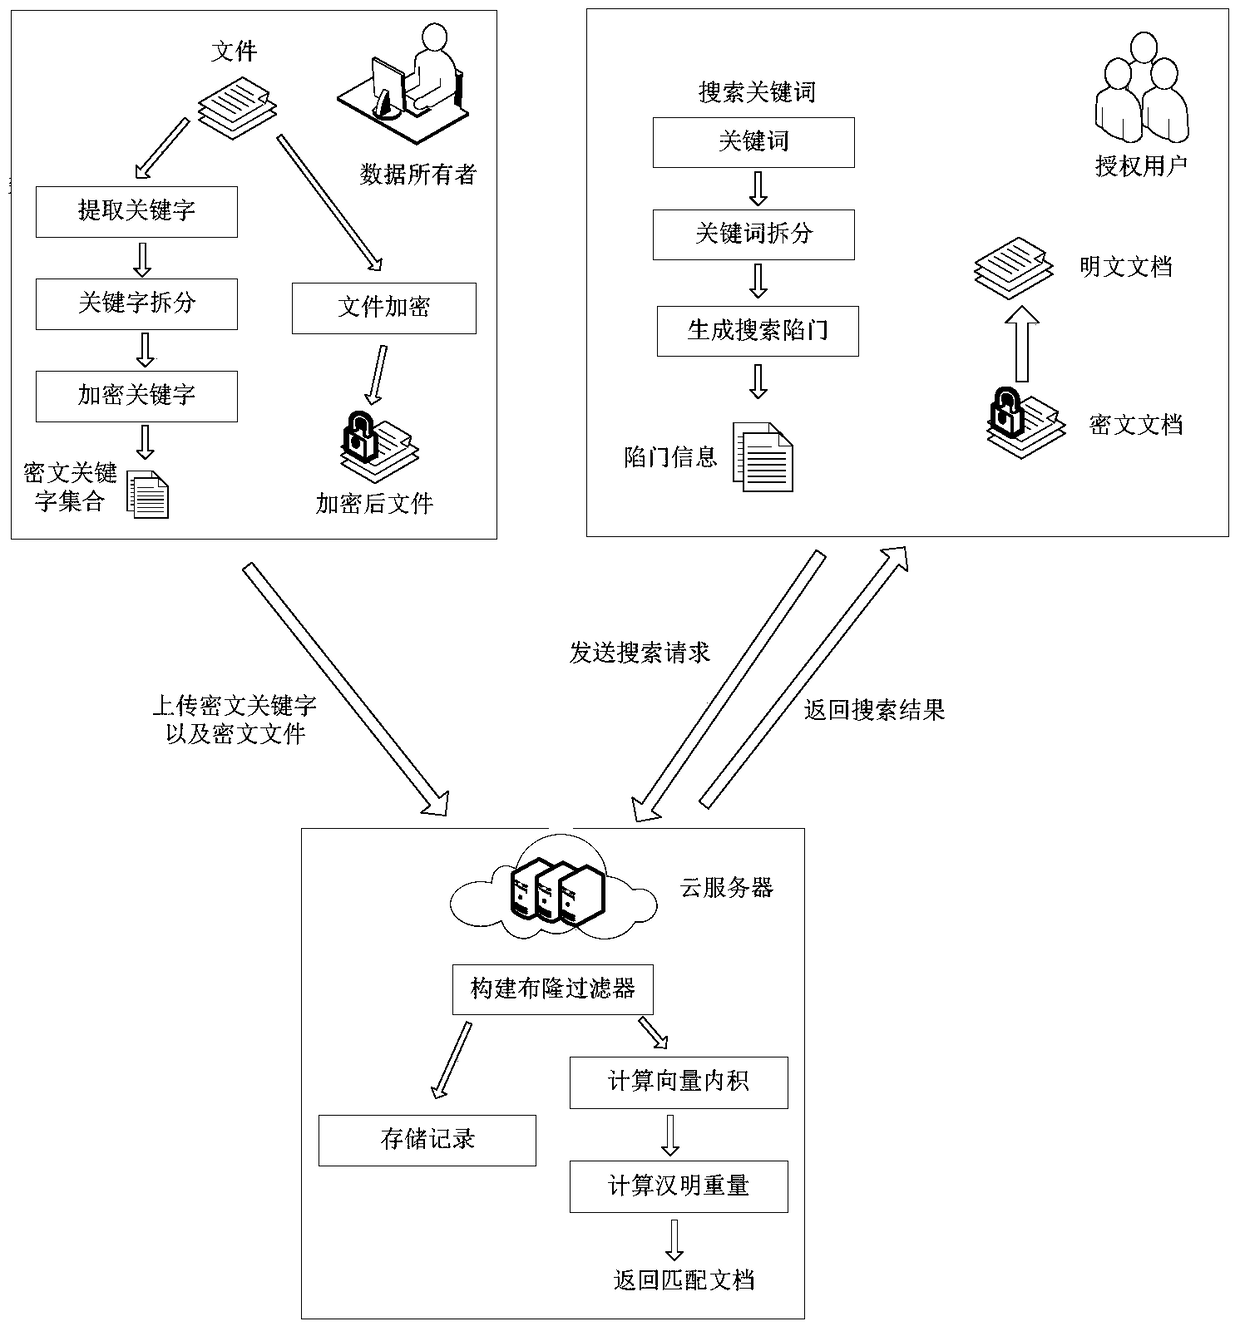 A searchable encryption method based on Chinese in cloud environment